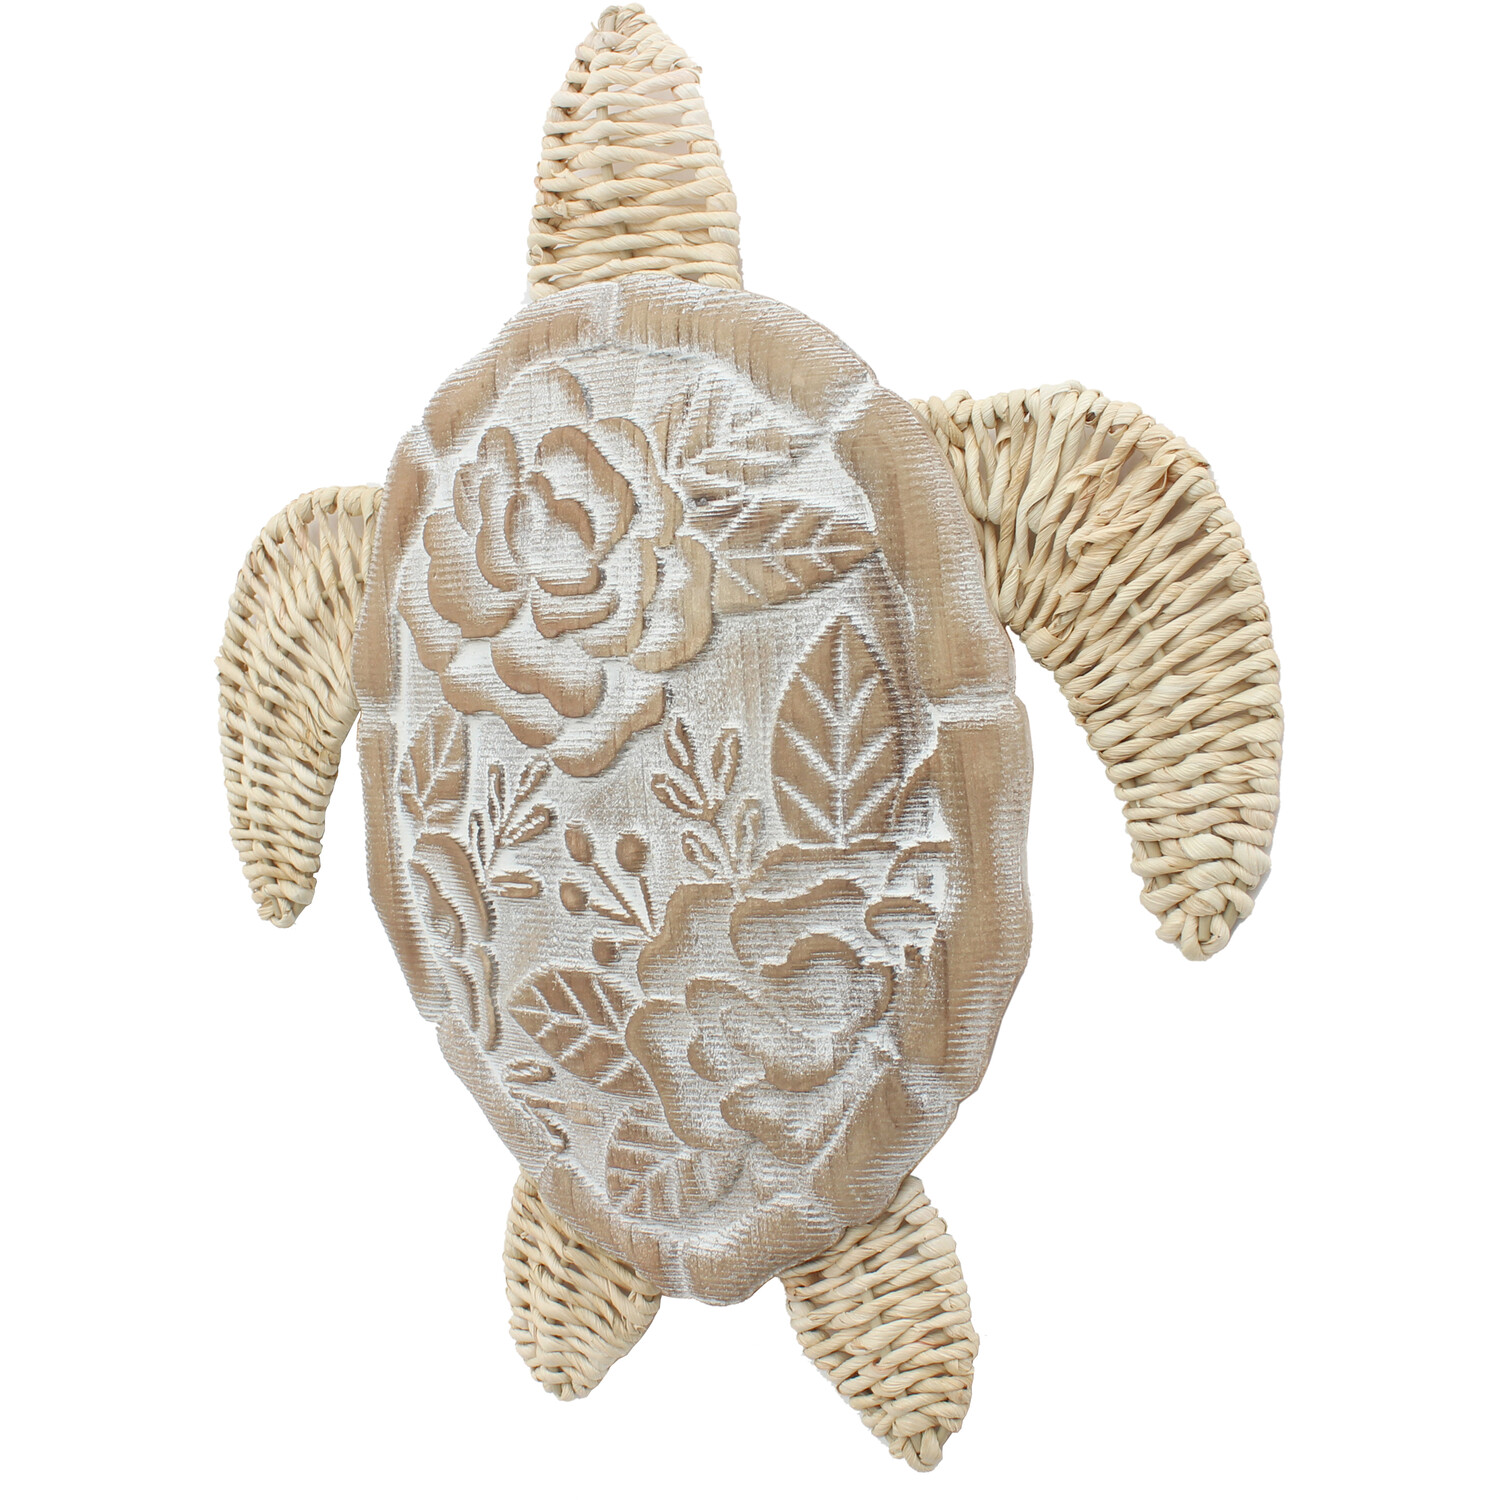 Tilly the Turtle Carved Wooden Art - Natural Image 2